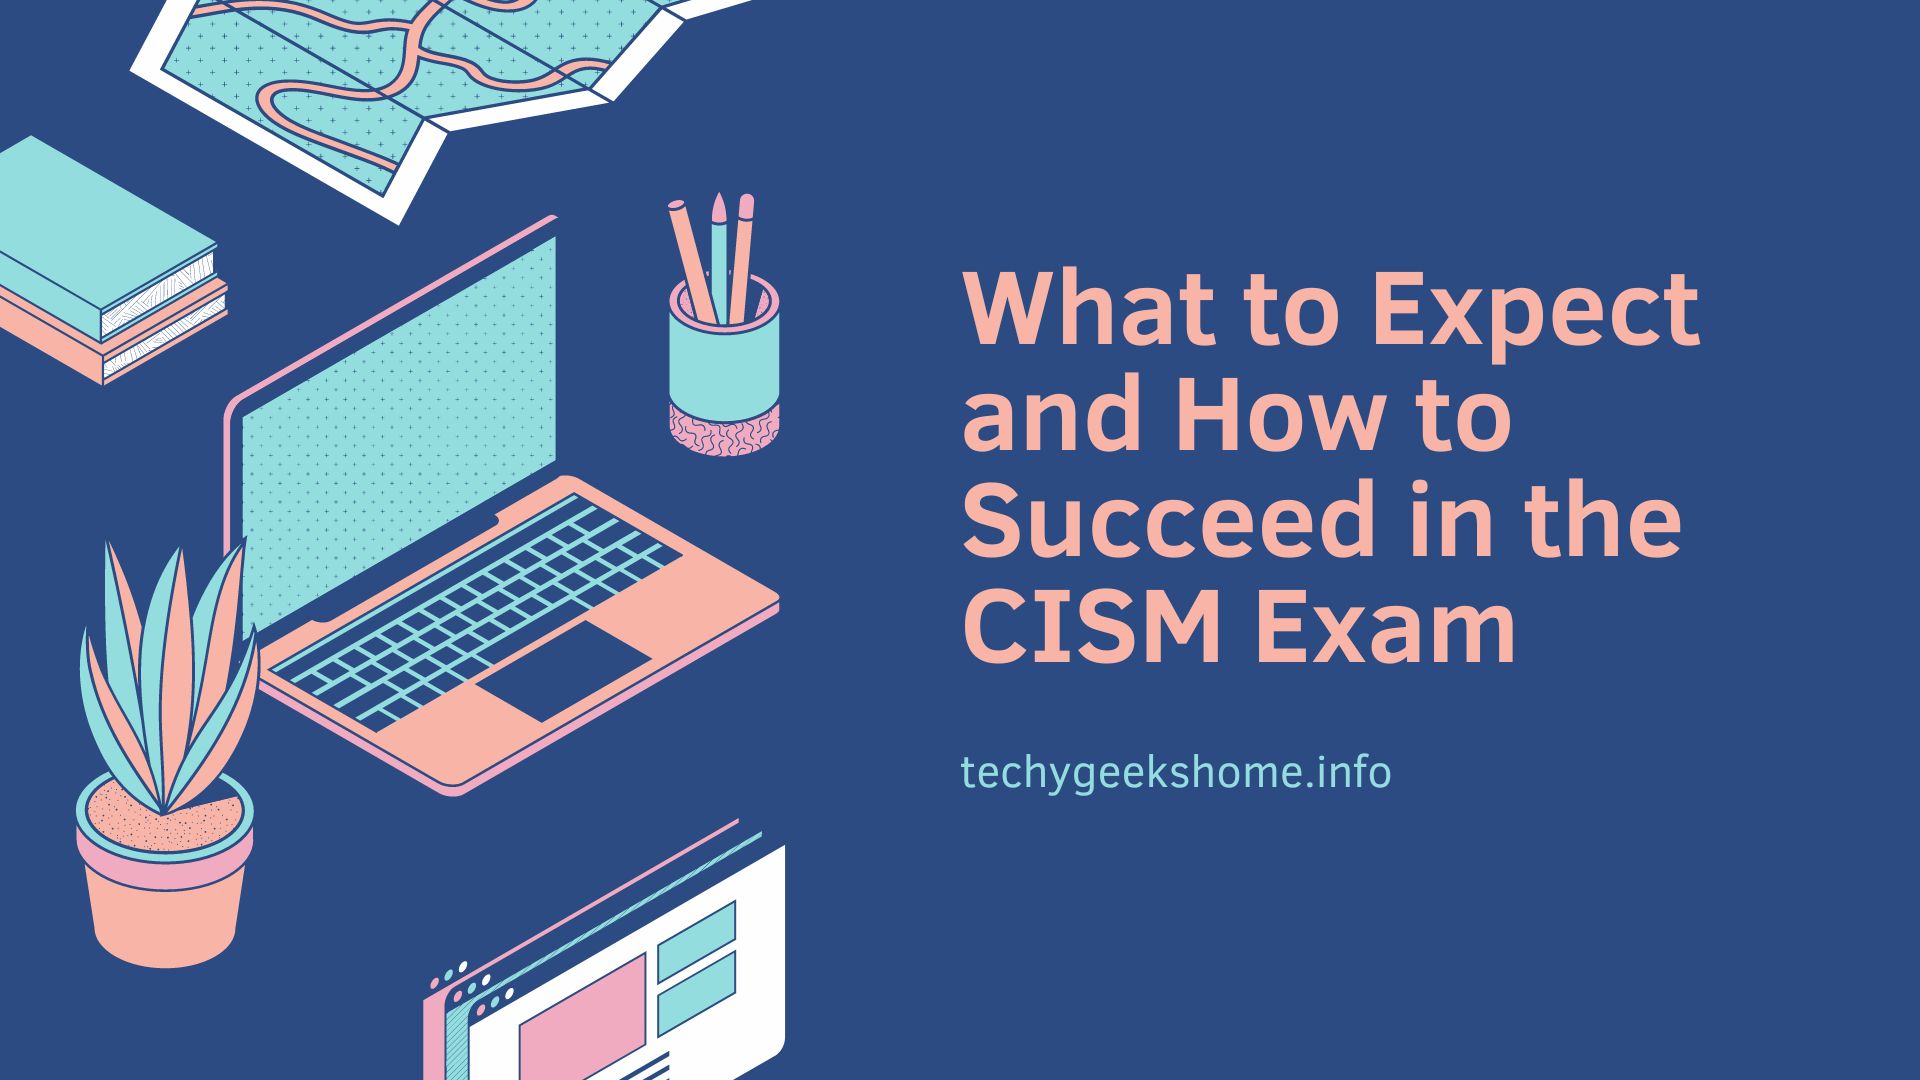 What to Expect and How to Succeed in the CISM Exam